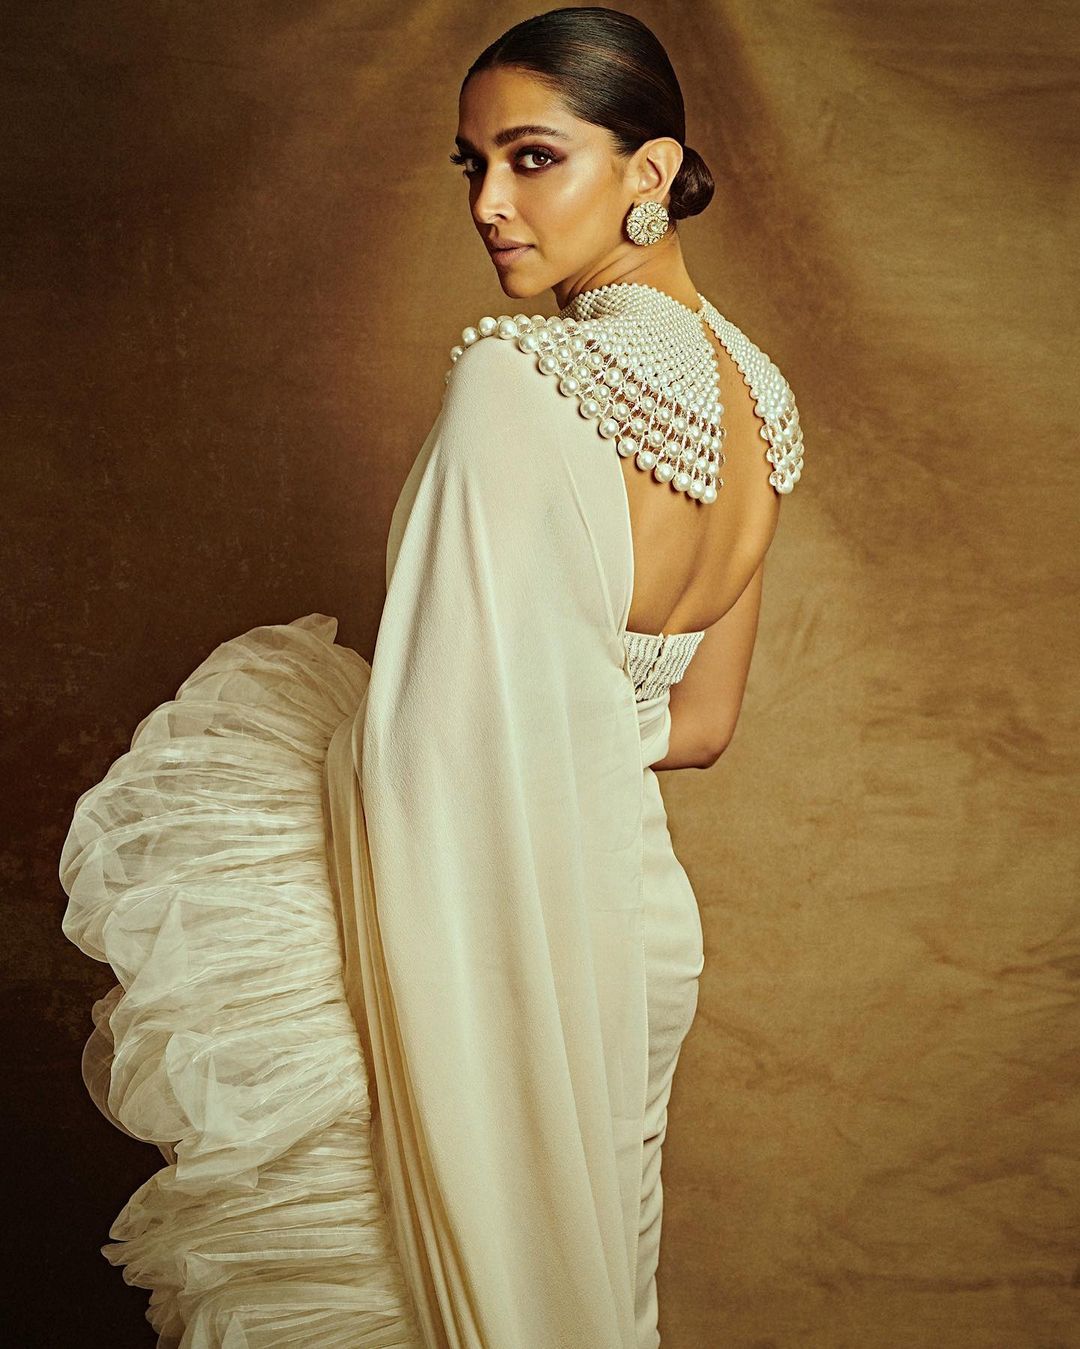 The dramatic pleated ruffles added drama to Deepika's overall look.